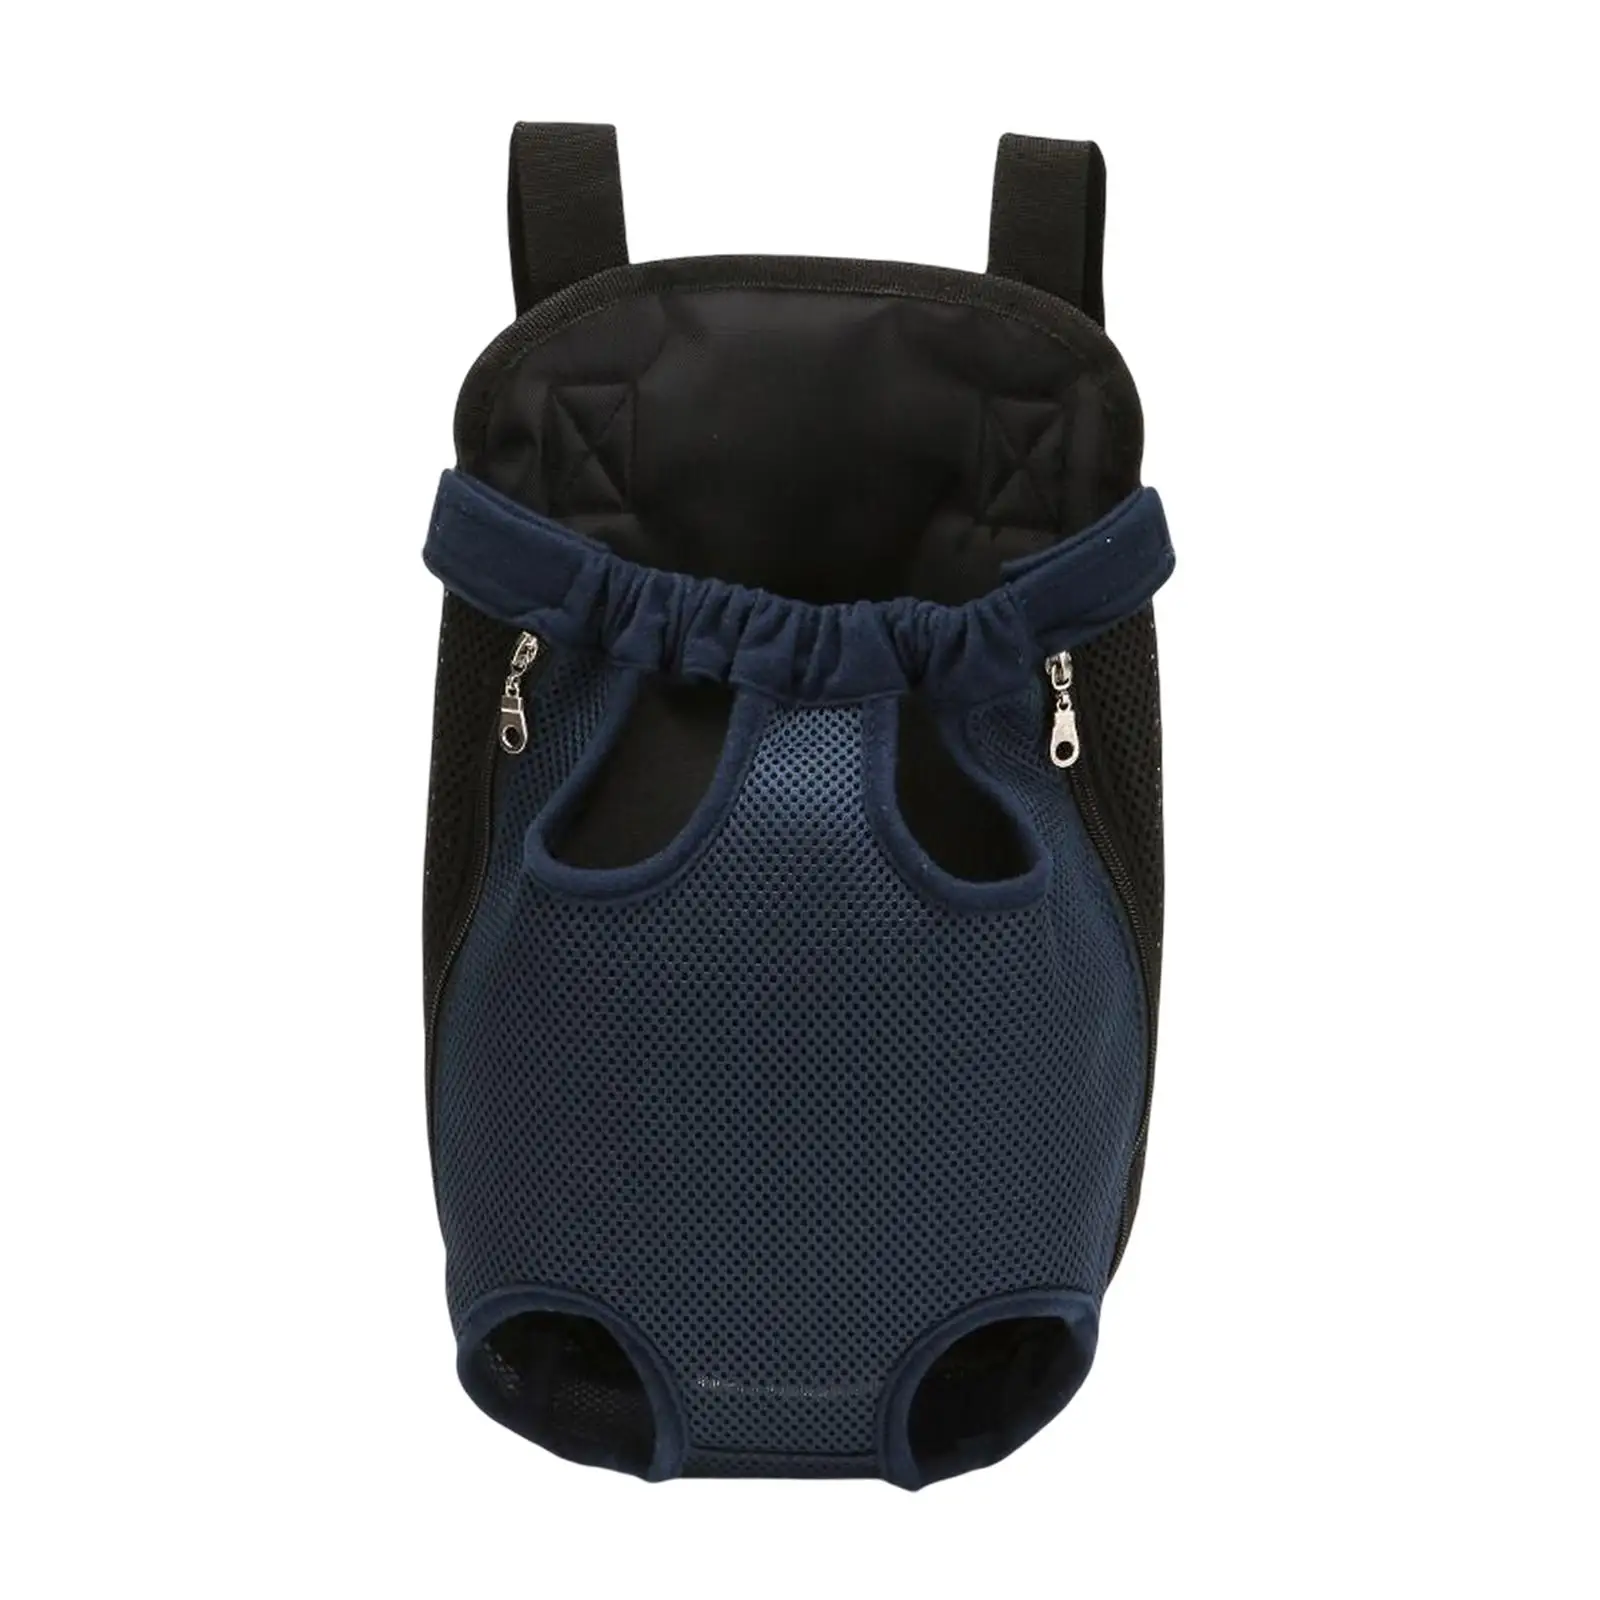 Pet Carrier Backpack, Front Facing Hands Free Adjustable for Dog Puppy Chihuahua